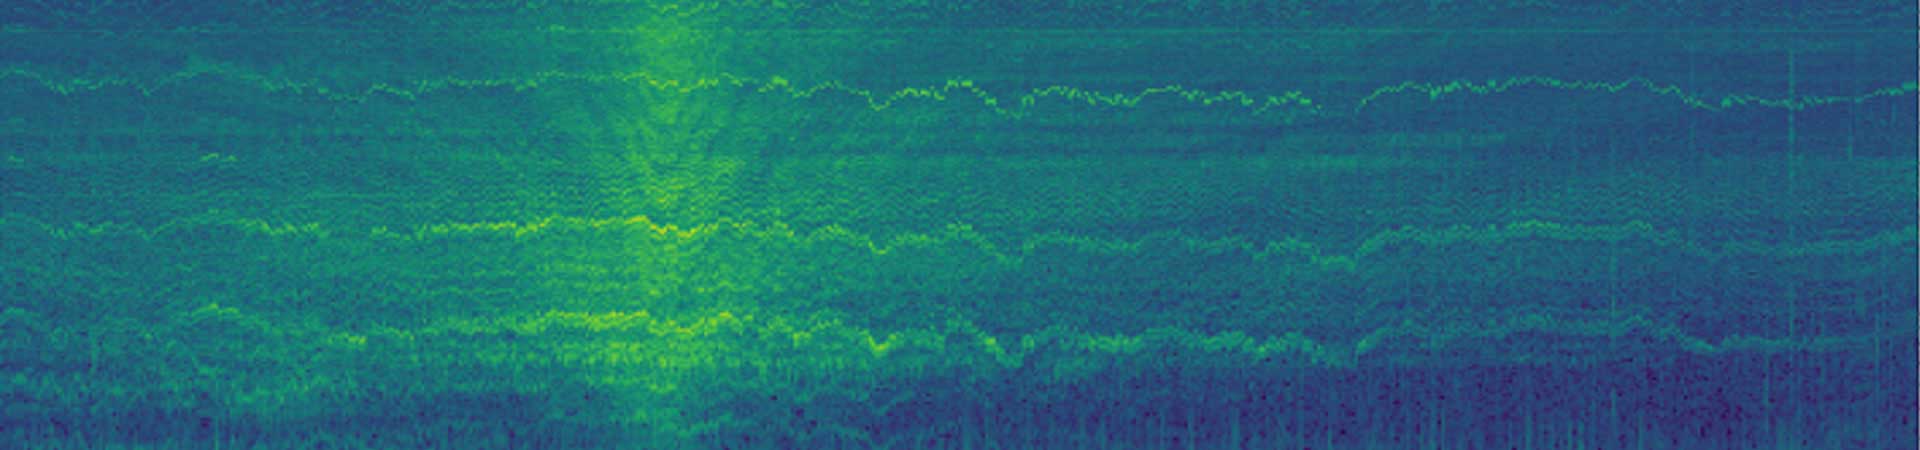 Underwater noise spectrogram from drifting hydrophones in the Pentland Firth while a turbine was operational